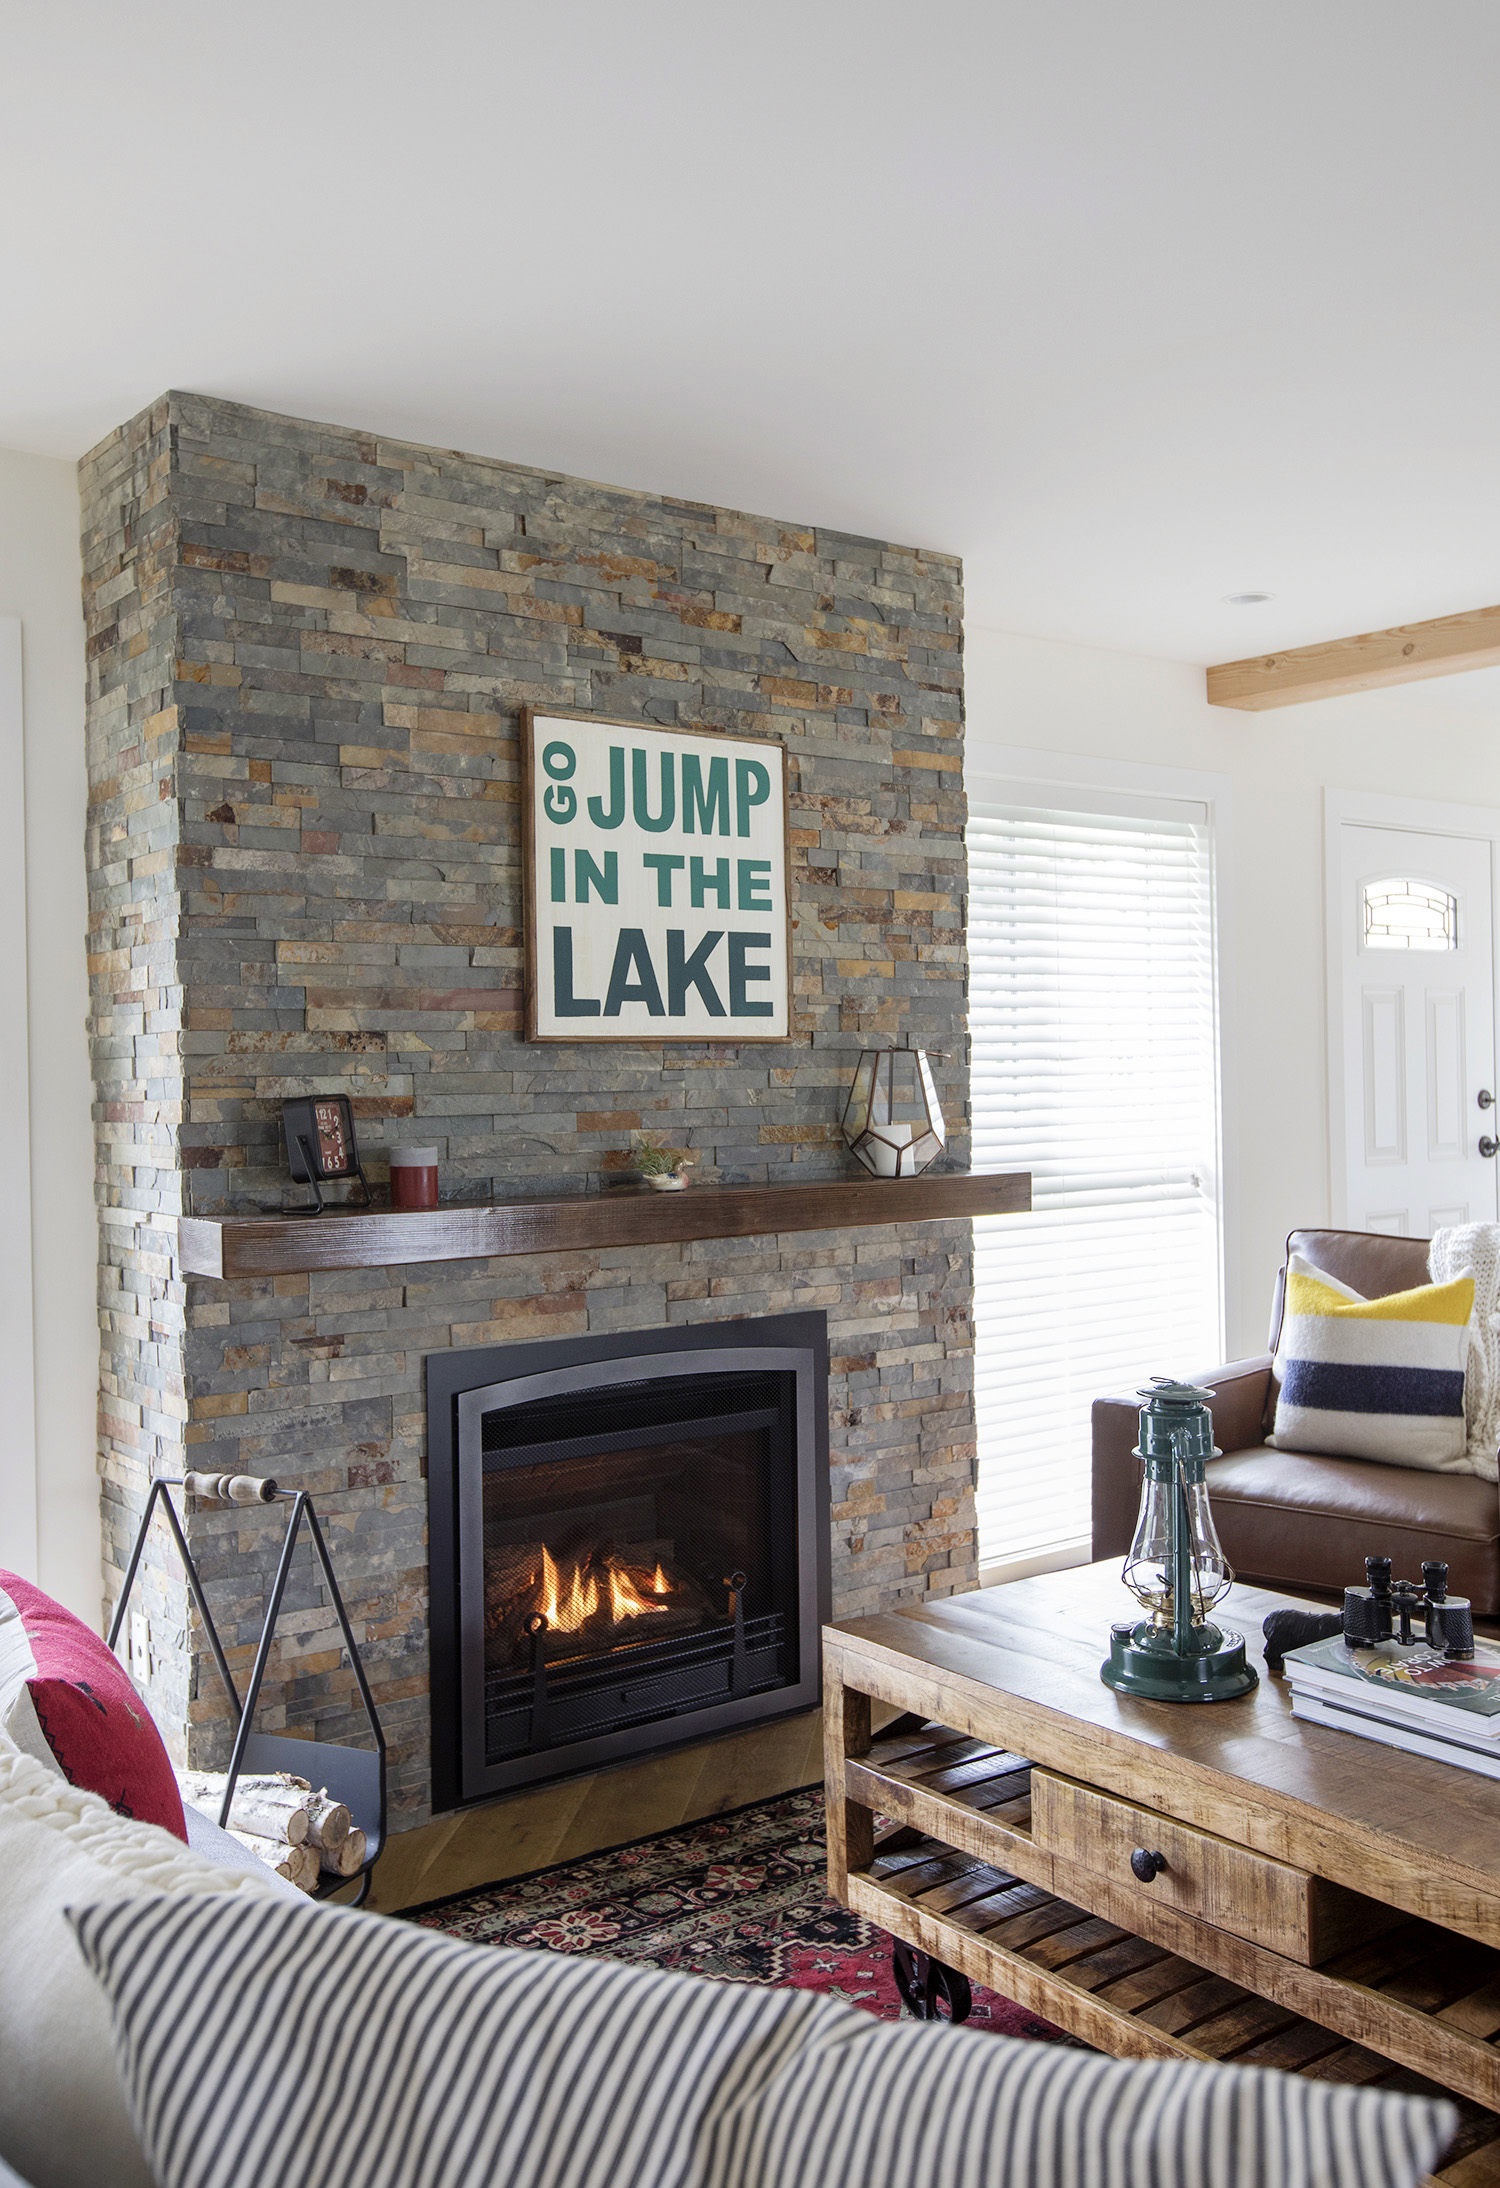 A jump in the lake sign sitting above a stone fireplace.